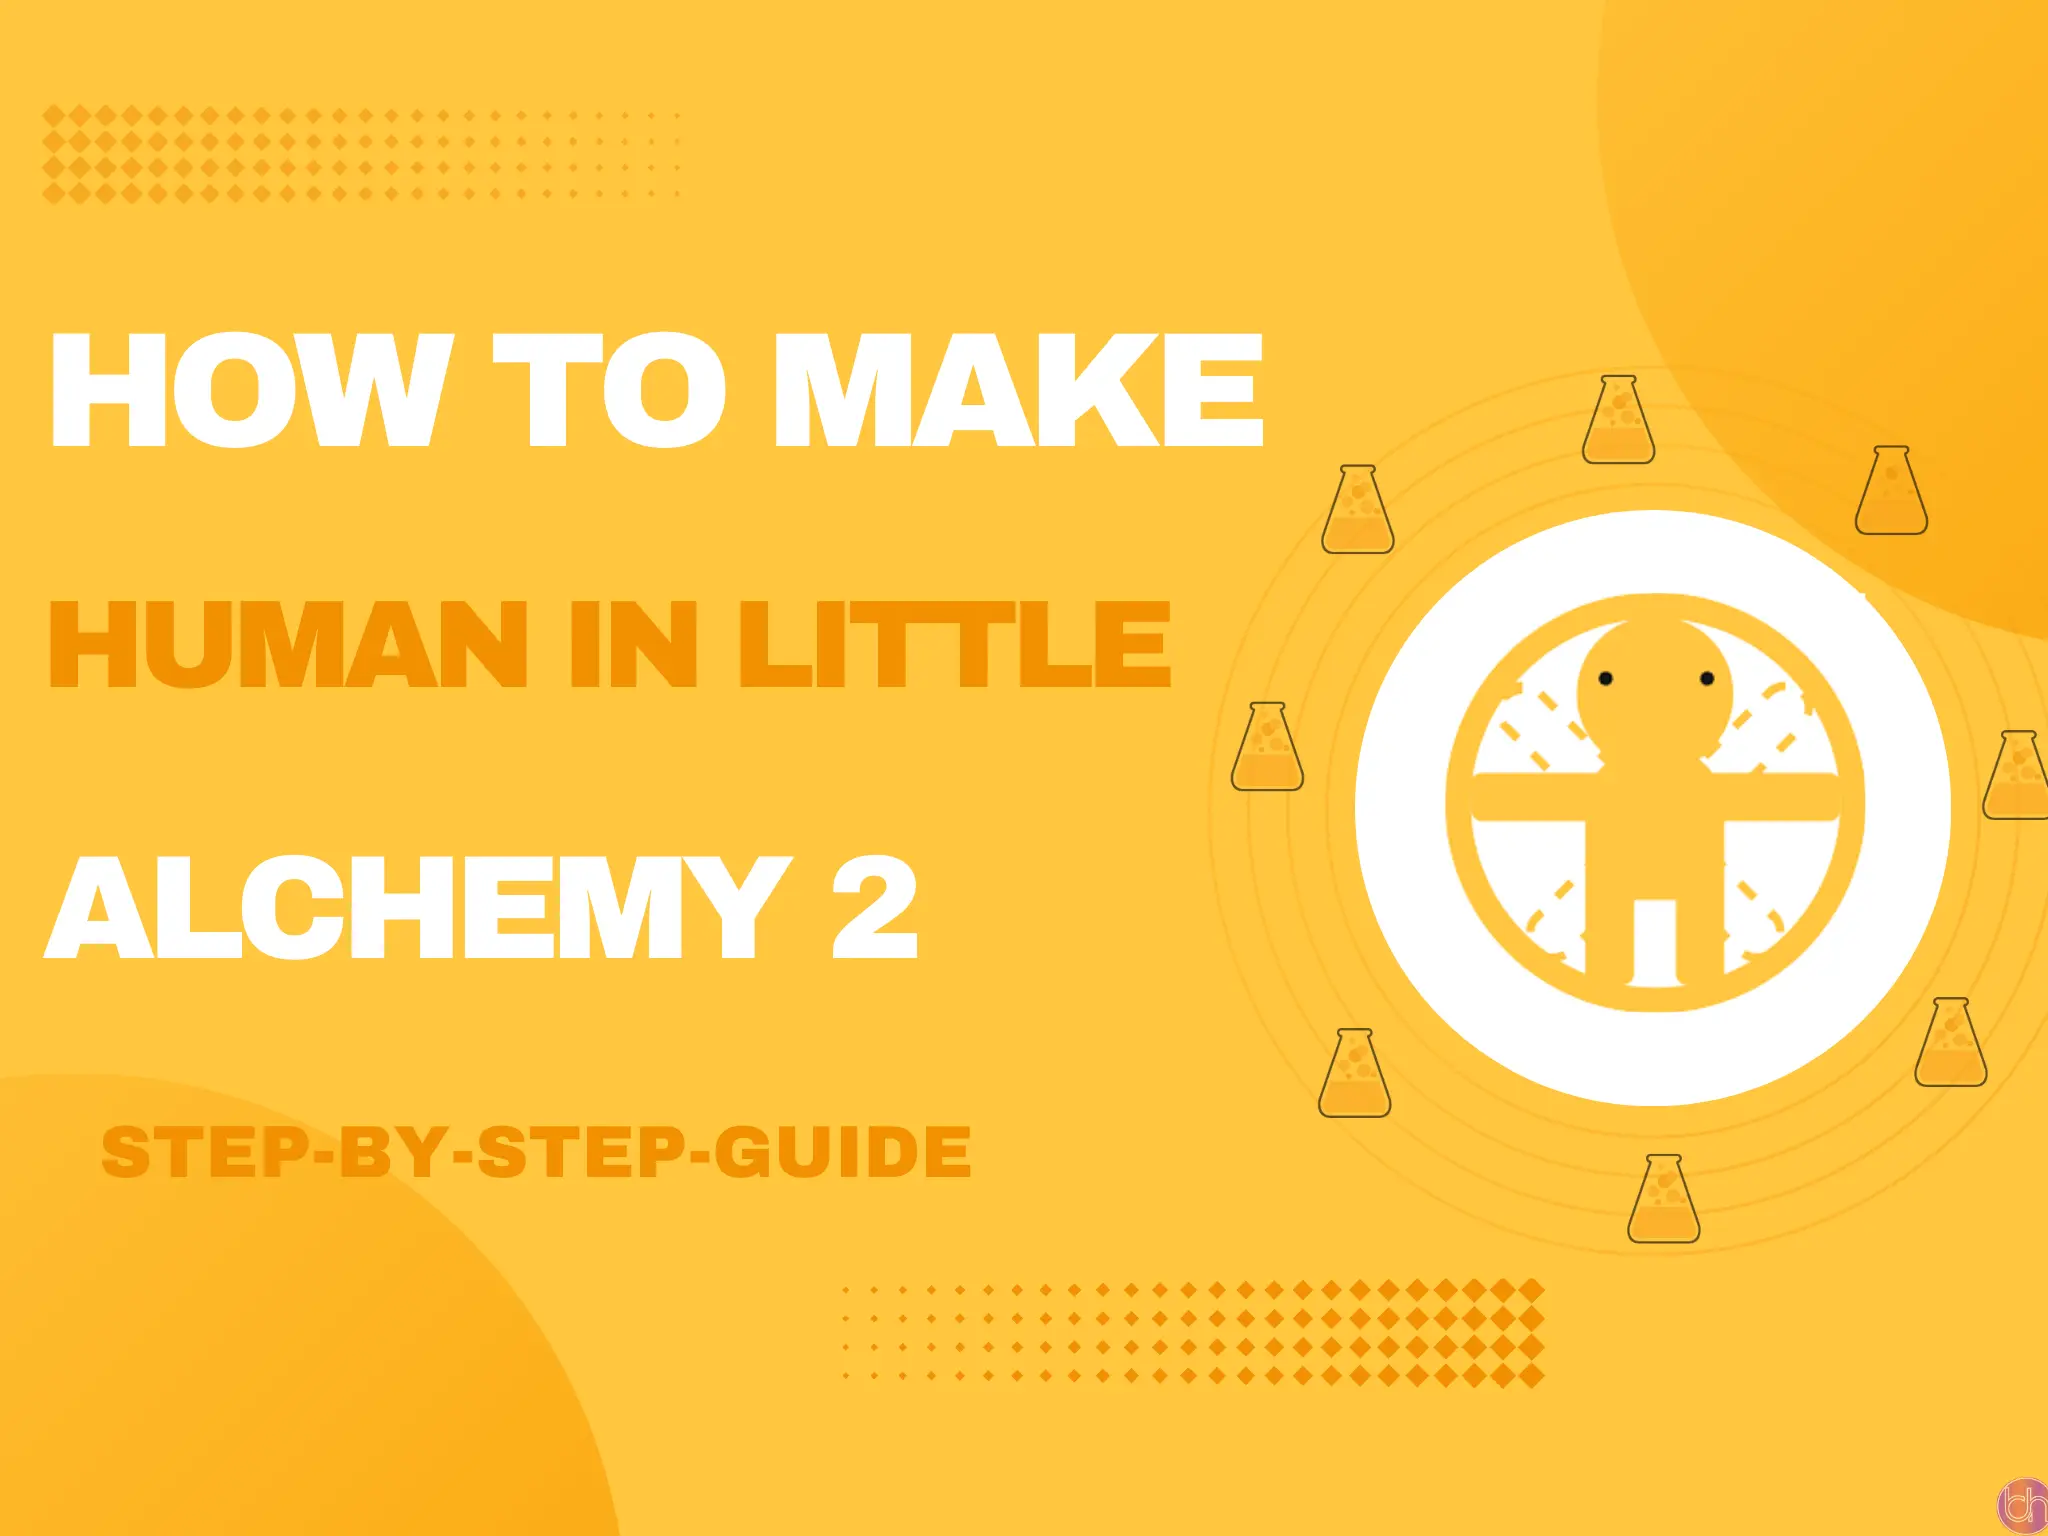 How to make Human in little alchemy 2